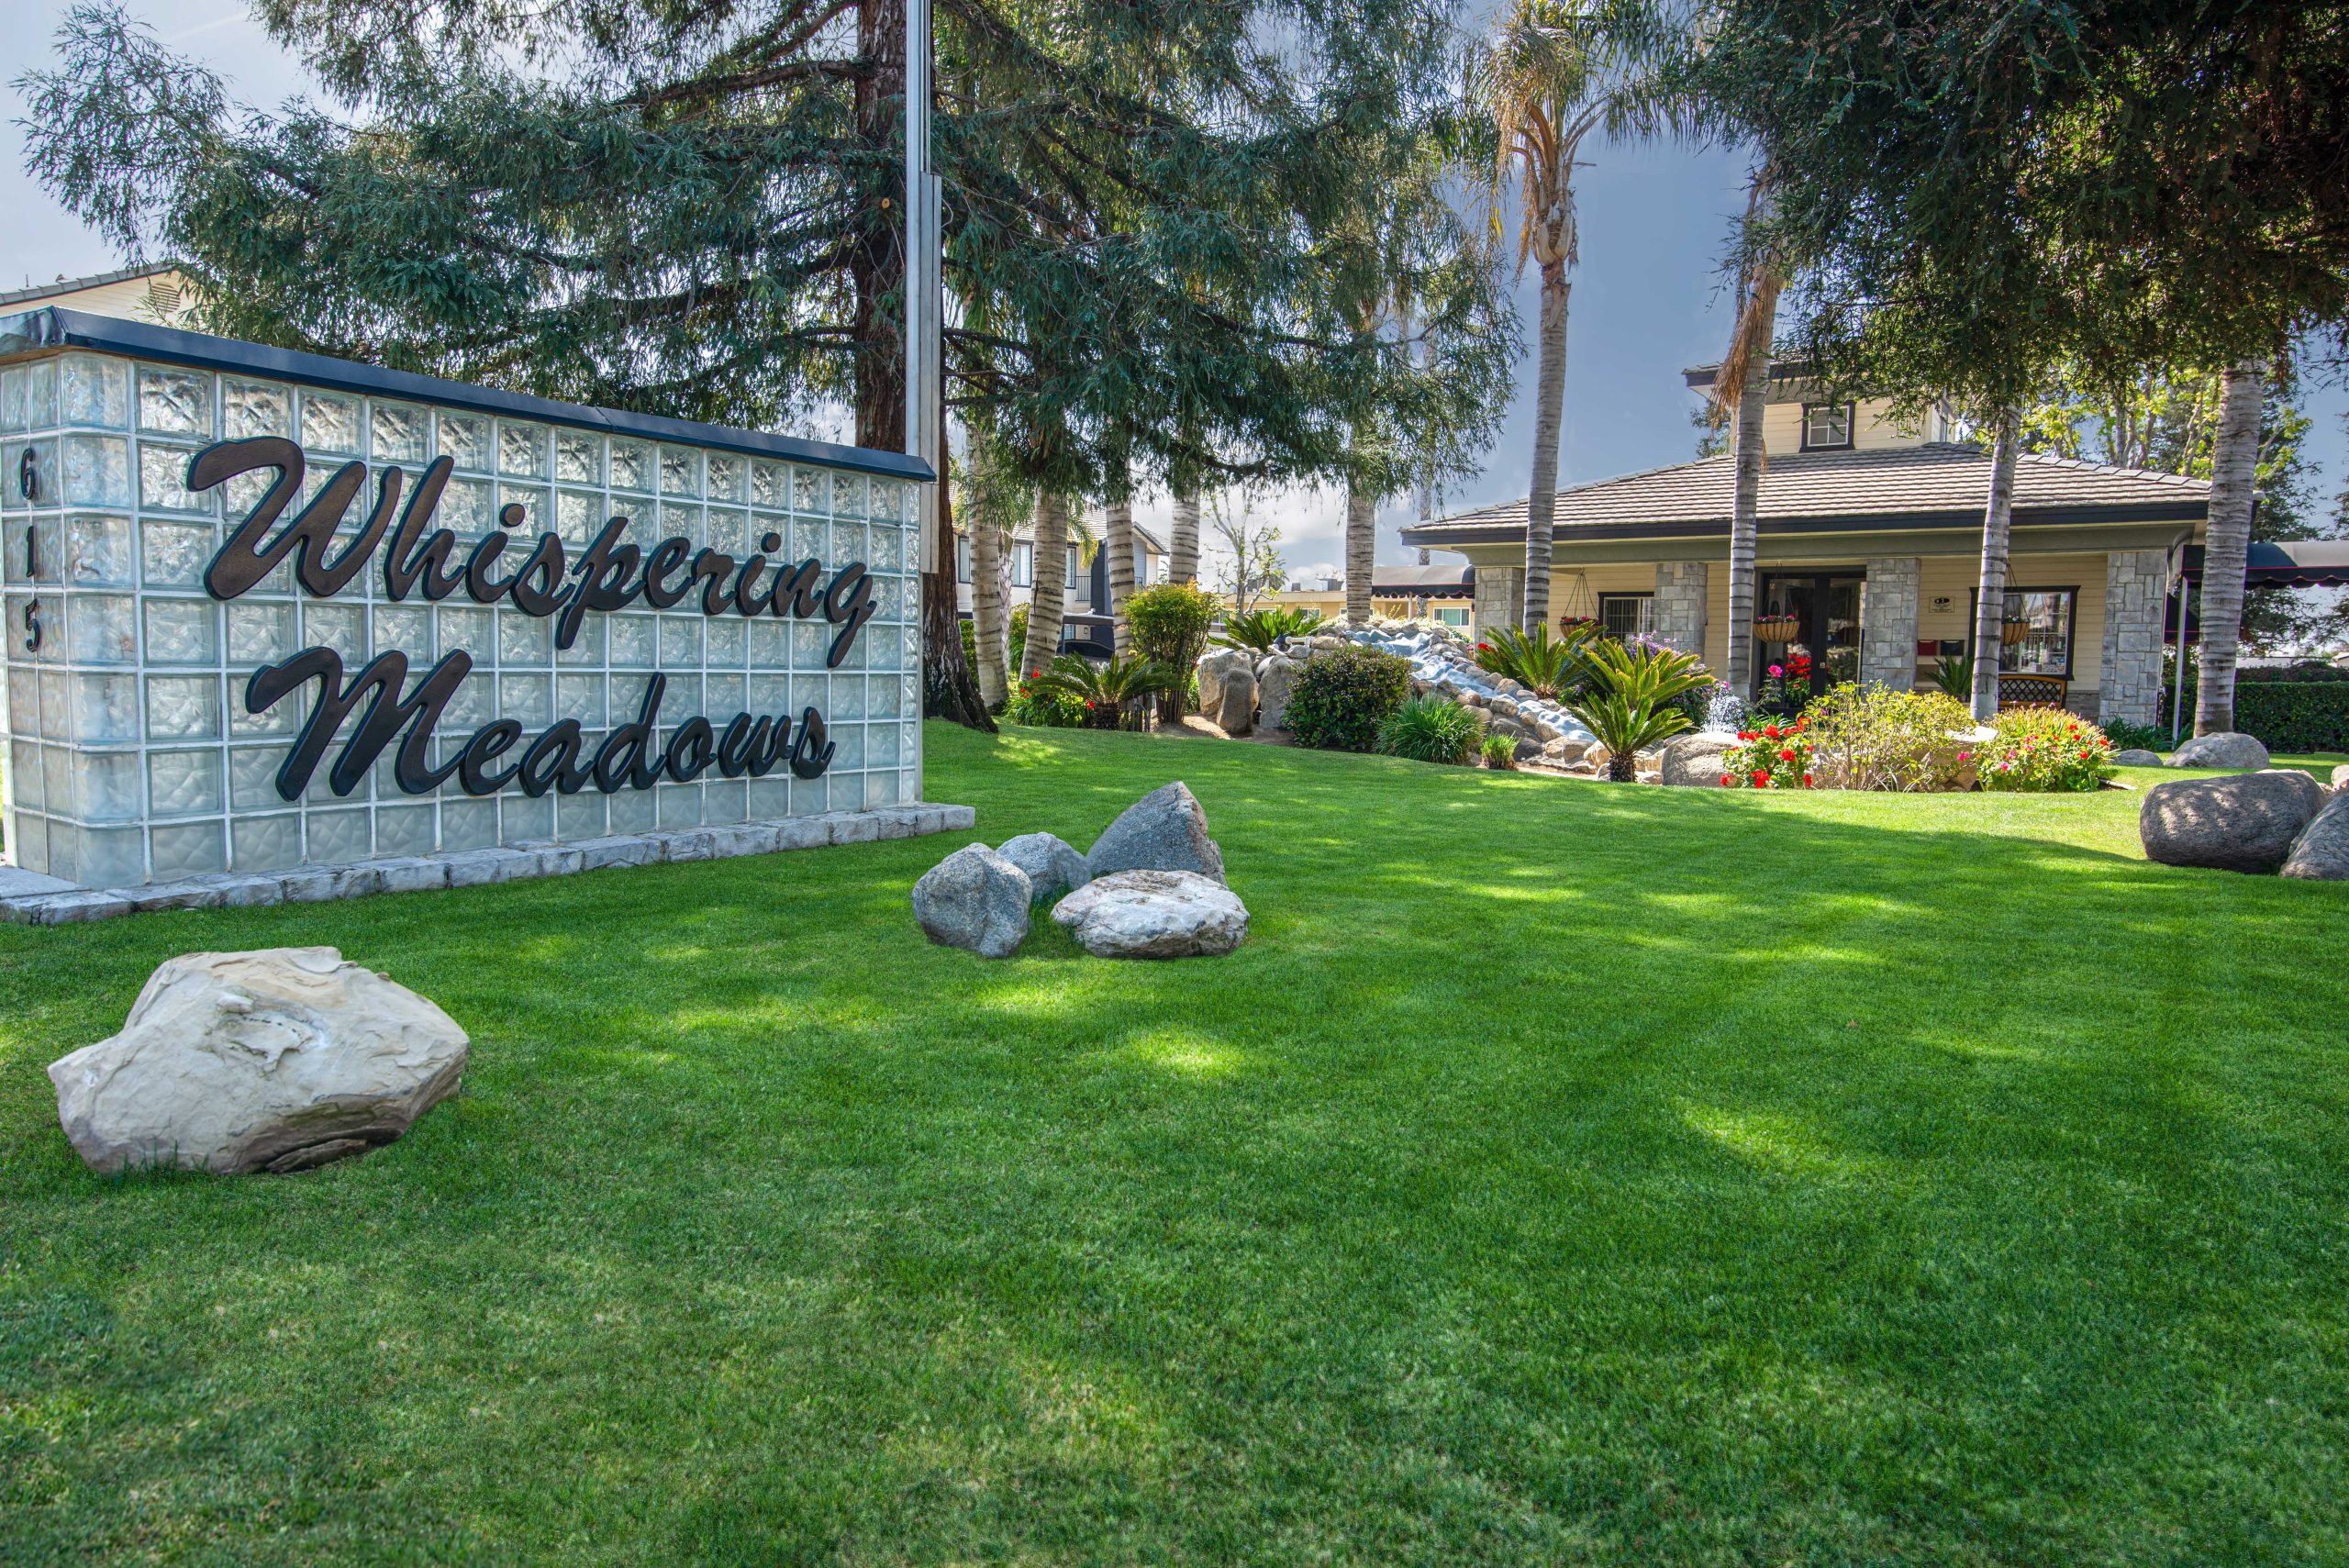 whispering meadows apartments bakersfield landscape ()